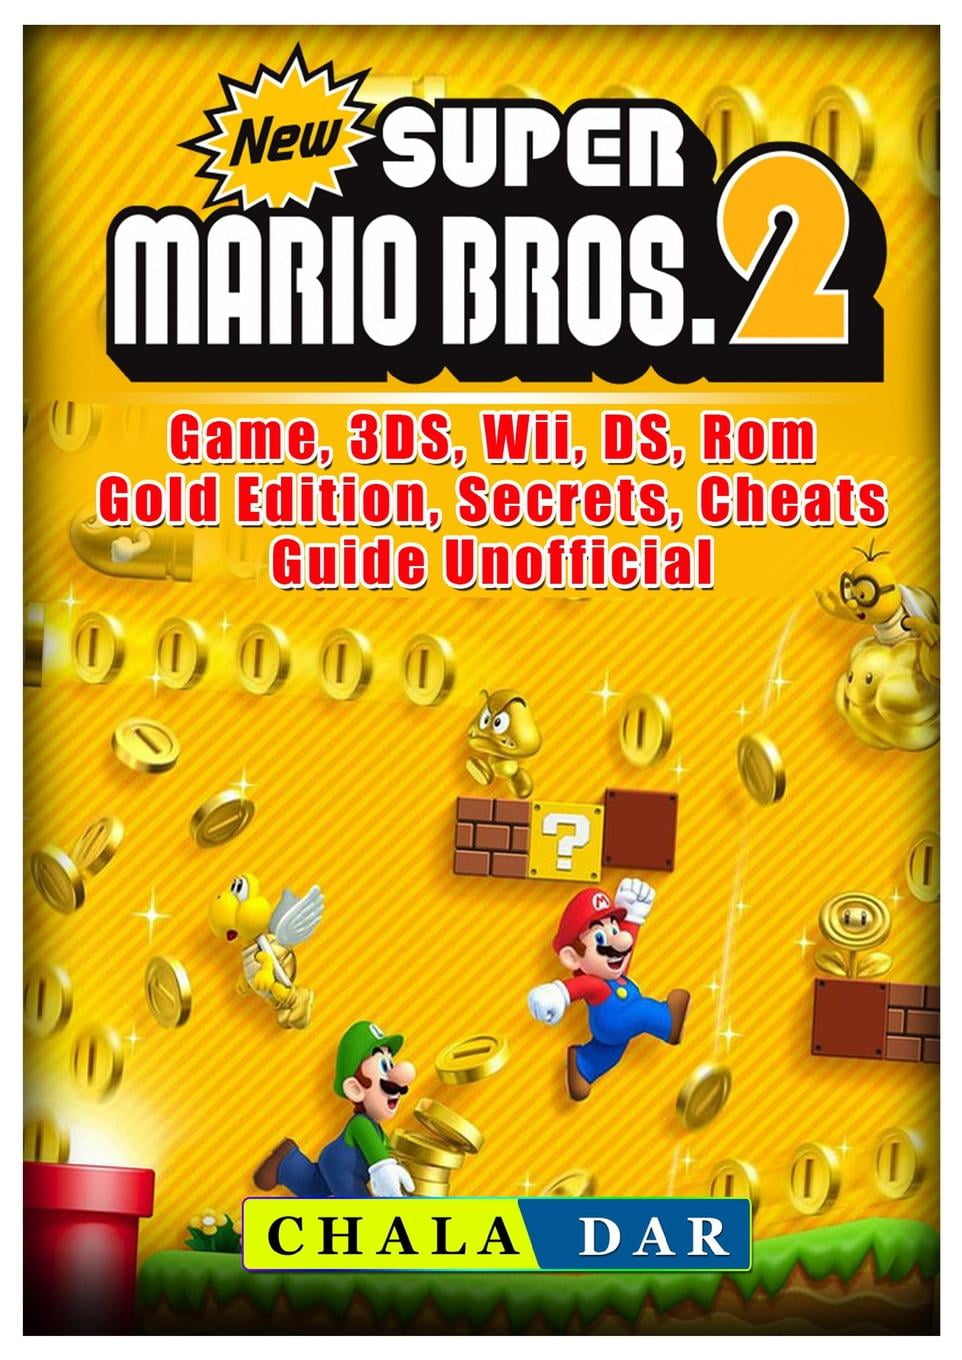 New Super Mario Bros 2, 3DS, Wii, Rom, Cheats, Secrets, Online, Exits, Gold  Edition, Game Guide Unofficial eBook by Hse Guides - EPUB Book